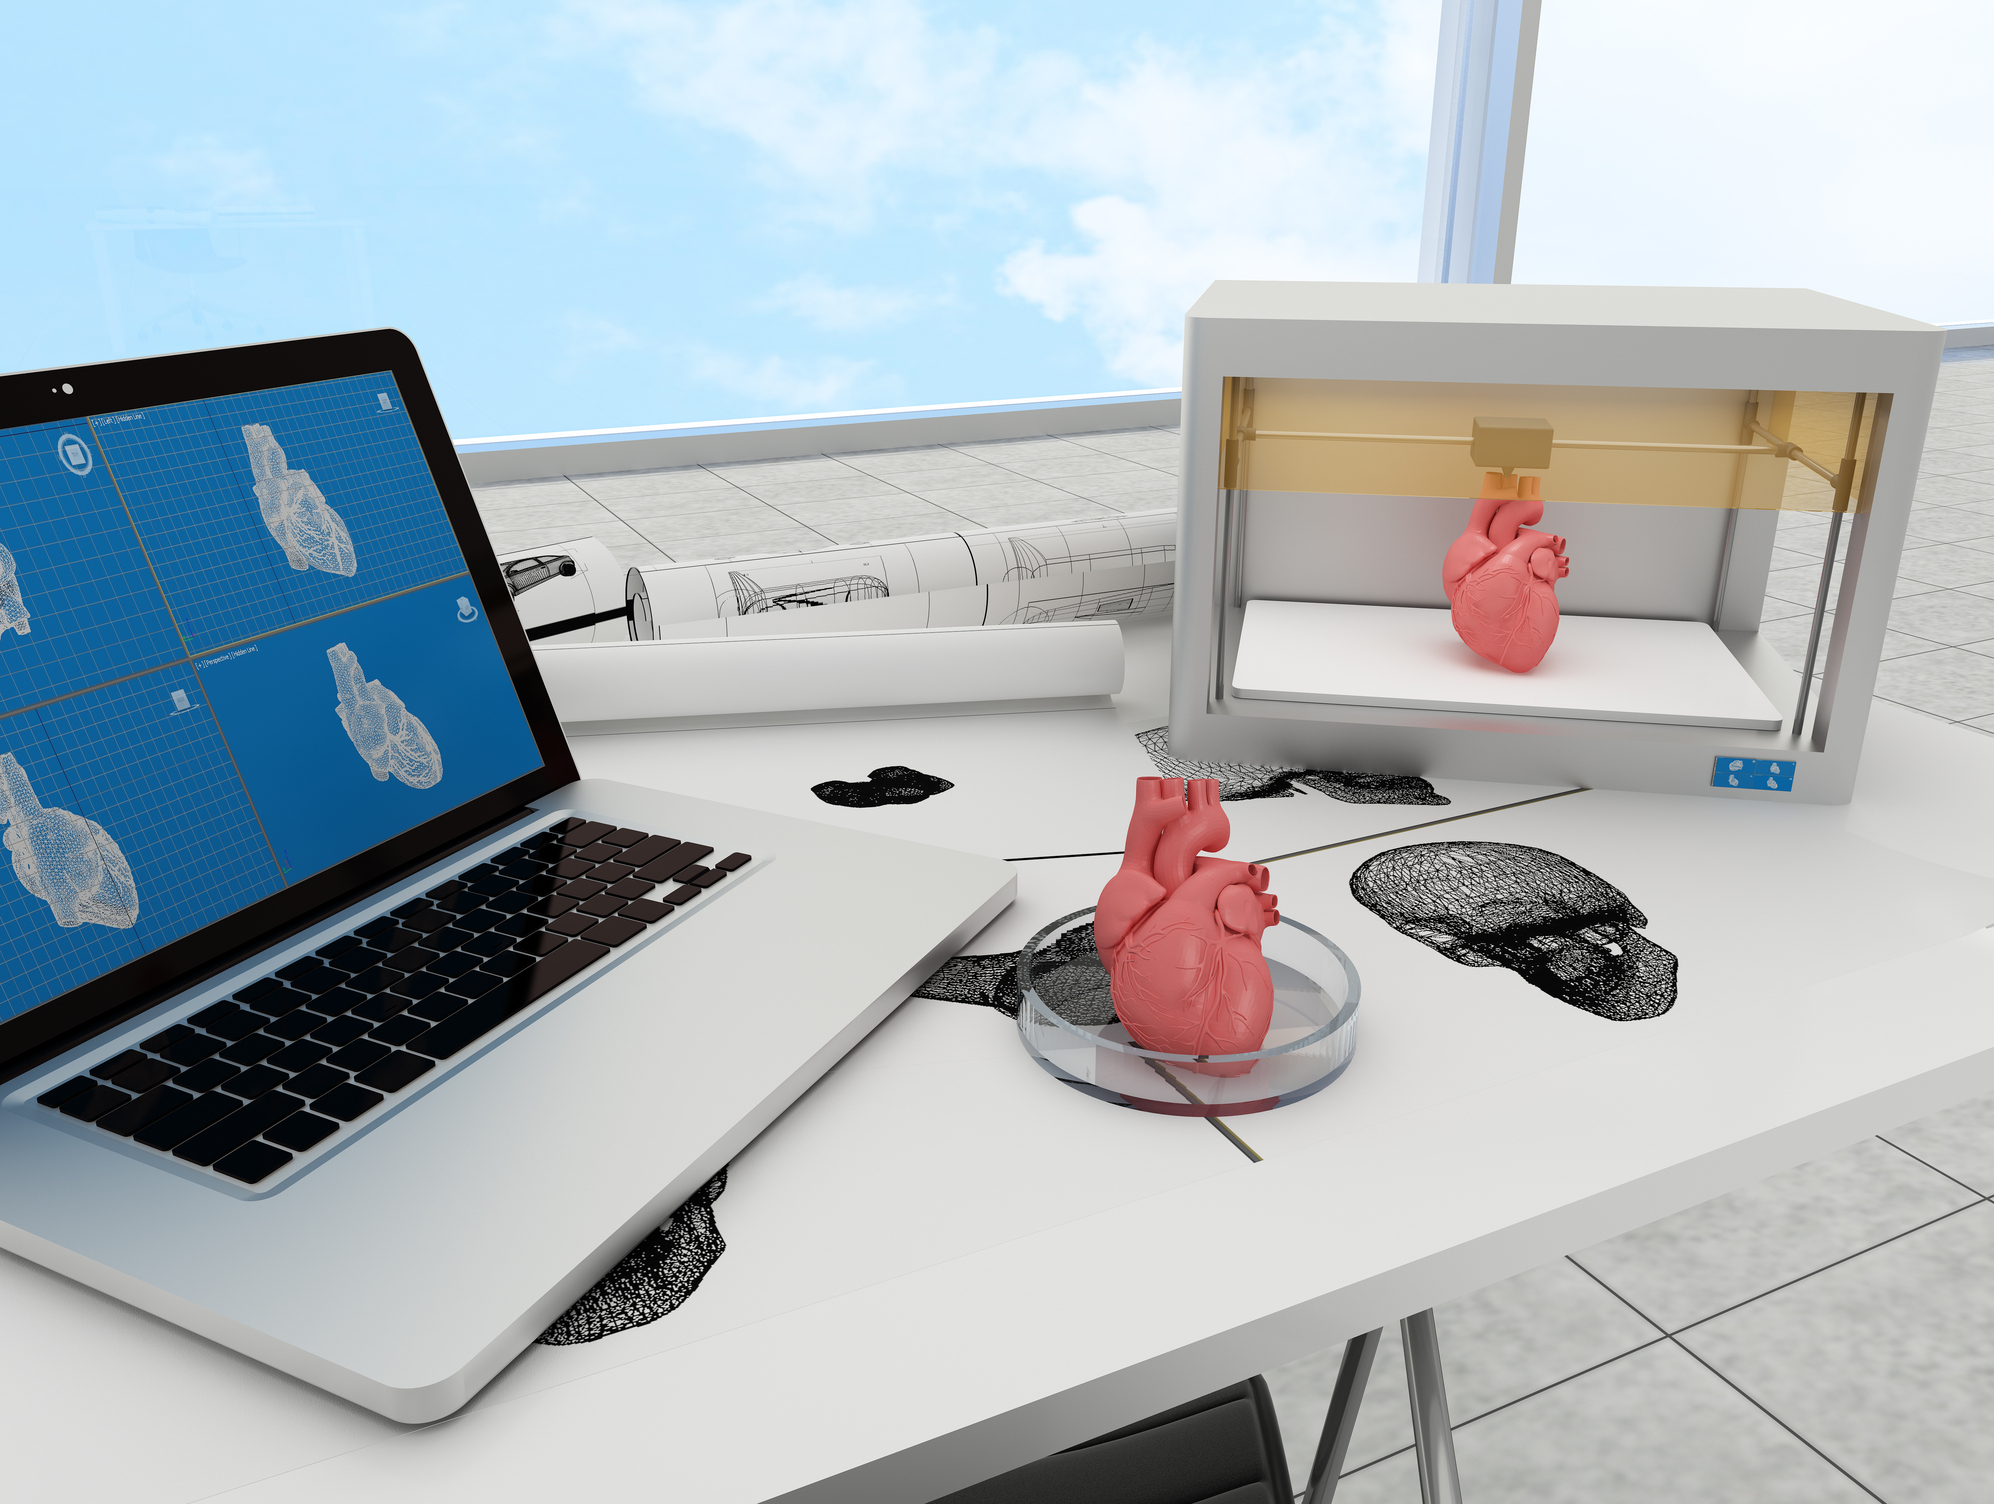 How 3D Printing Impacts the Medical Industry